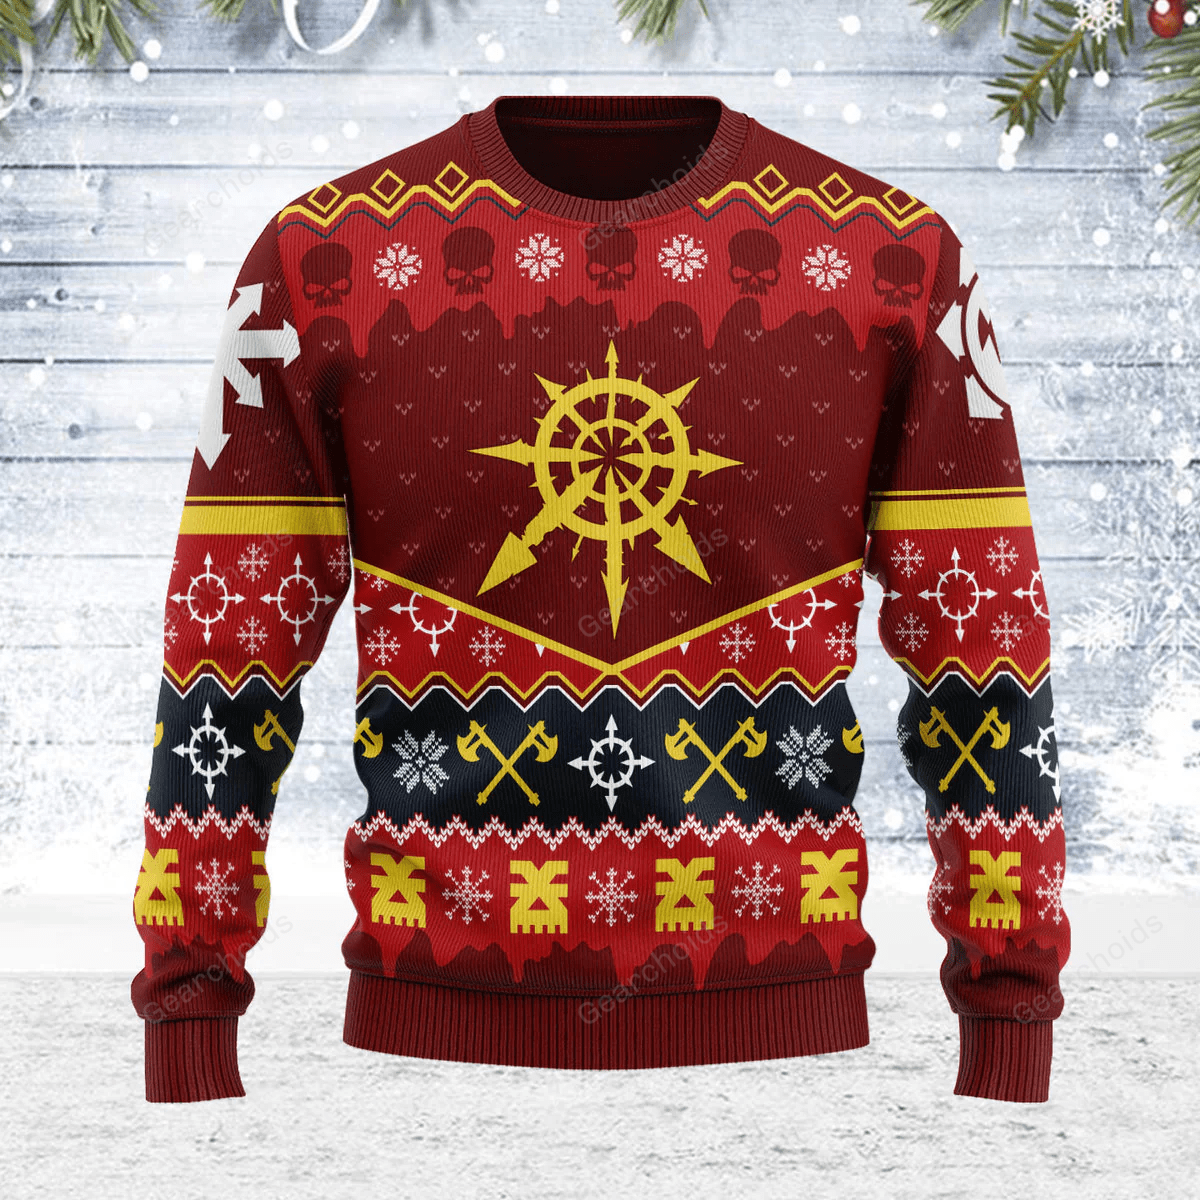 Slay Bells Ring Khorne Chaos Iconic - Ugly Christmas Sweater